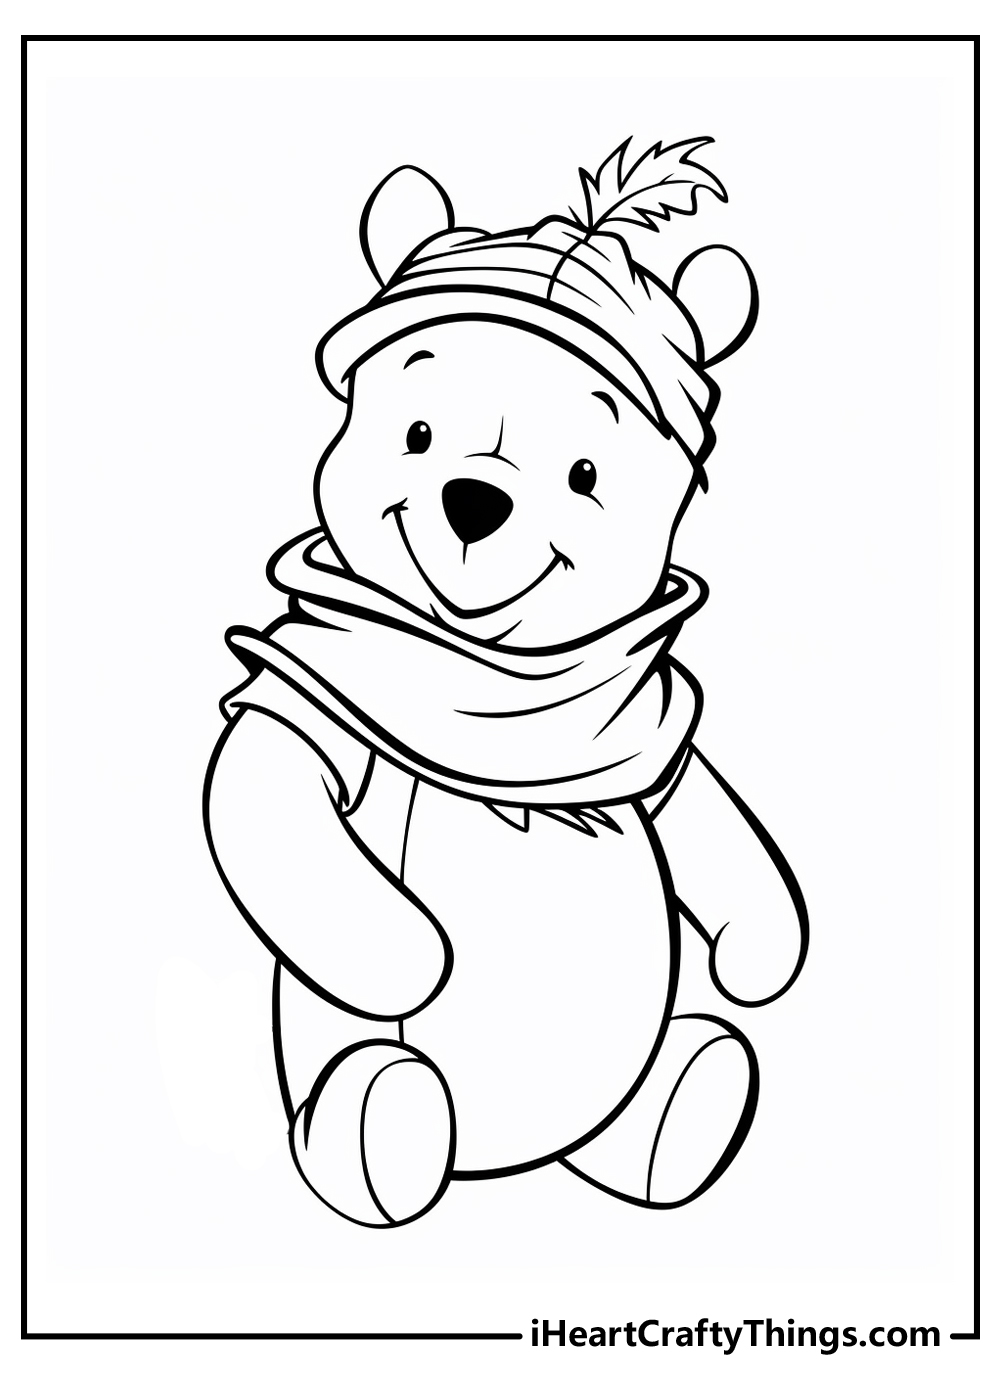 Free Disney Christmas Printable Coloring Pages for Kids - Honey +